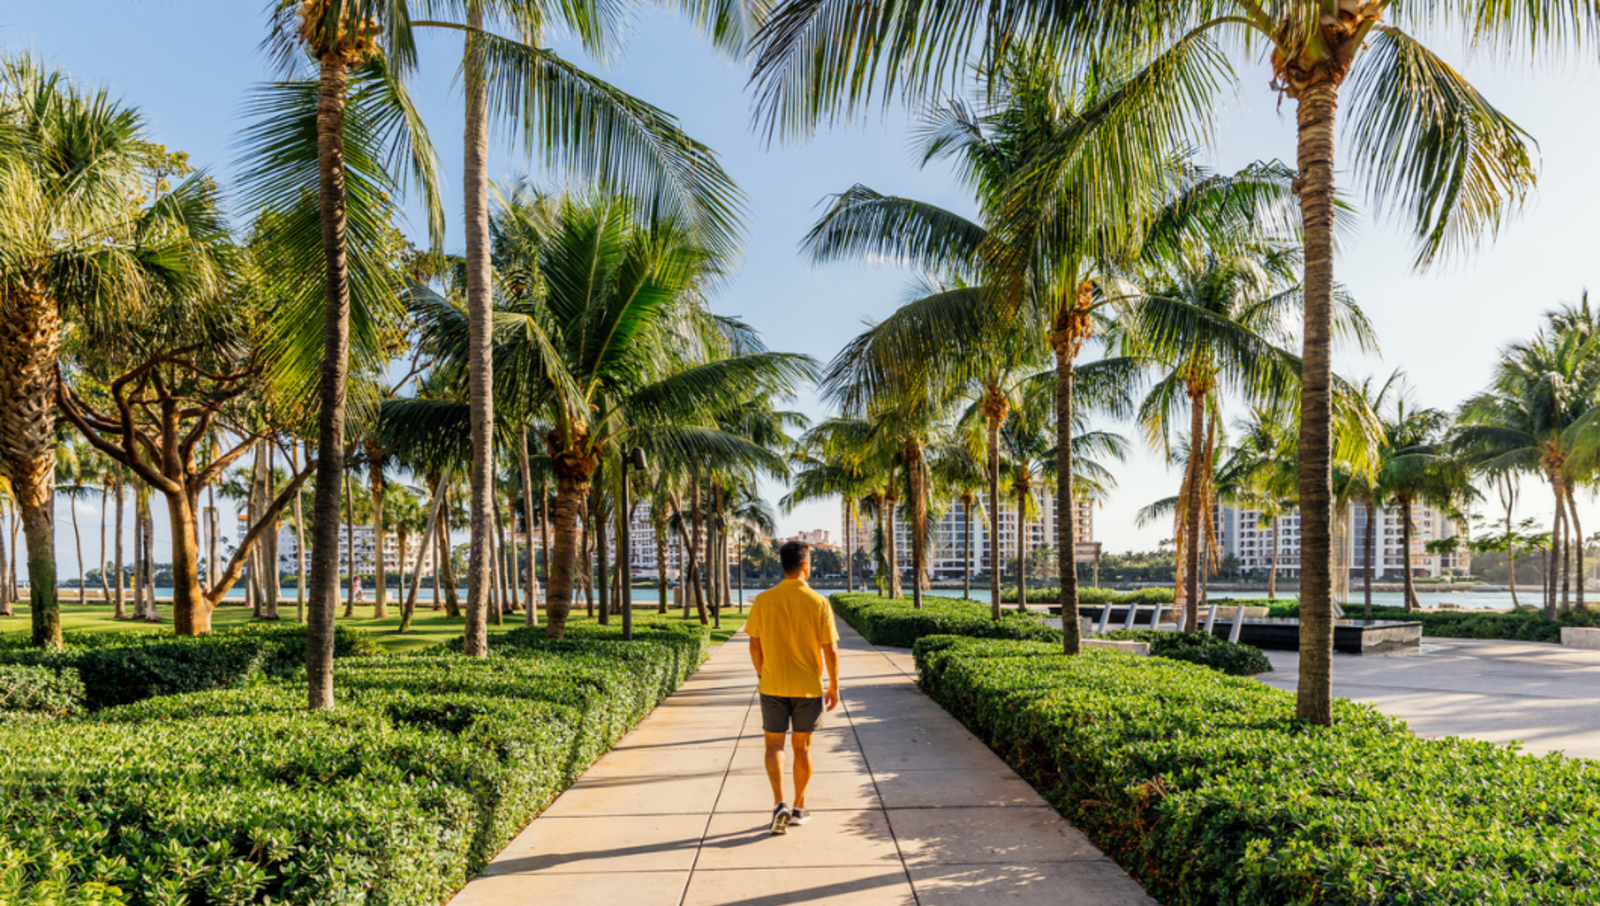 man walking down bath leading towards water lined with palm trees